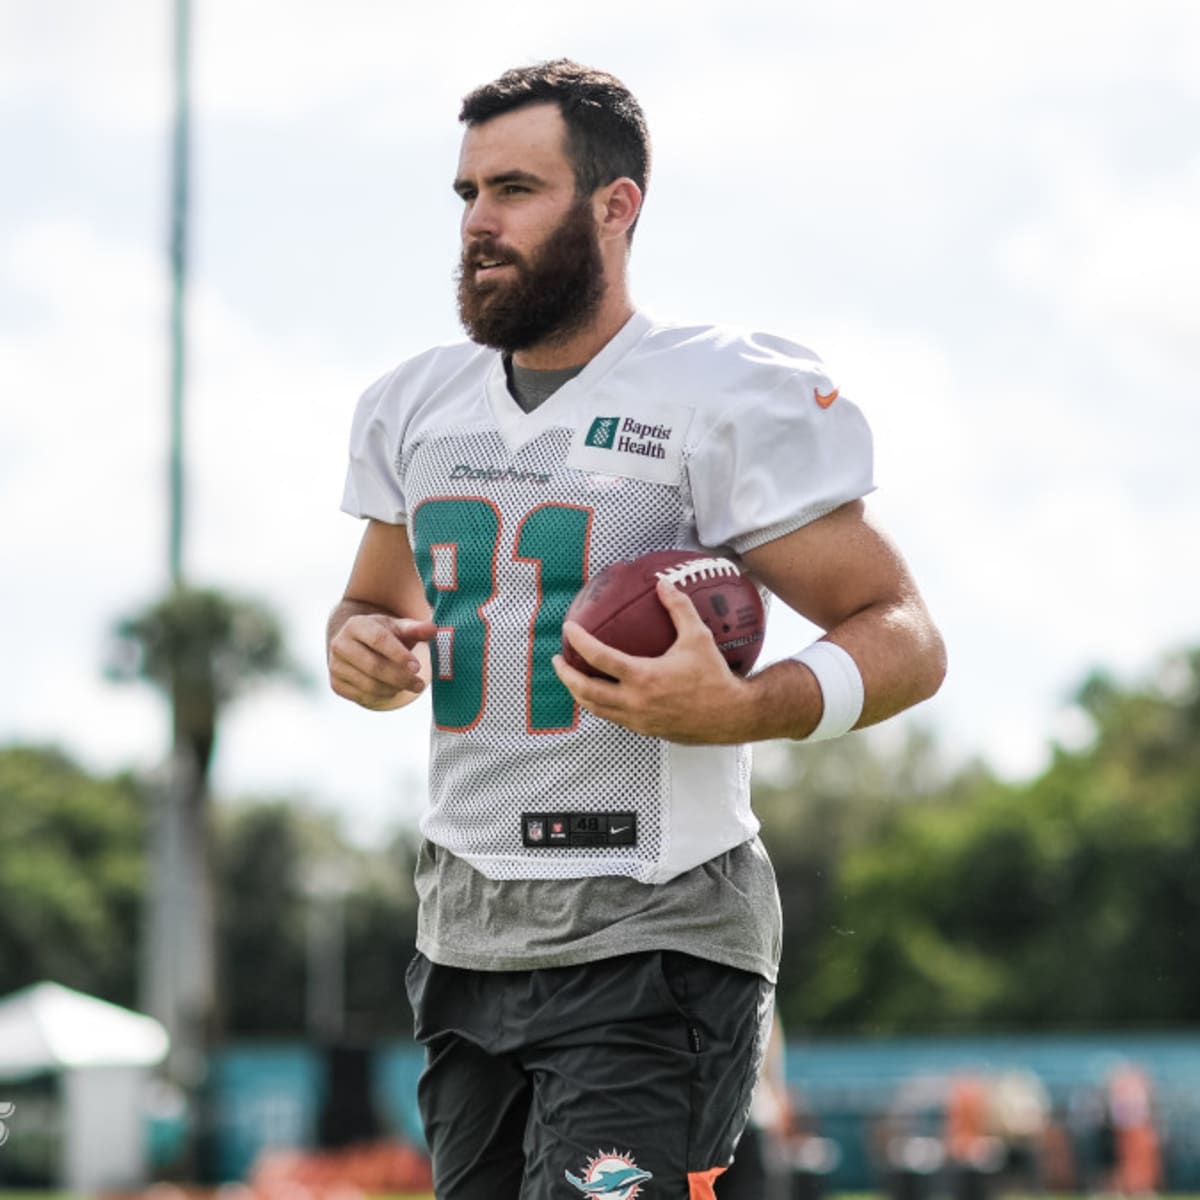 Wednesday Miami Dolphins Notebook: QB News, Smythe's Perspective